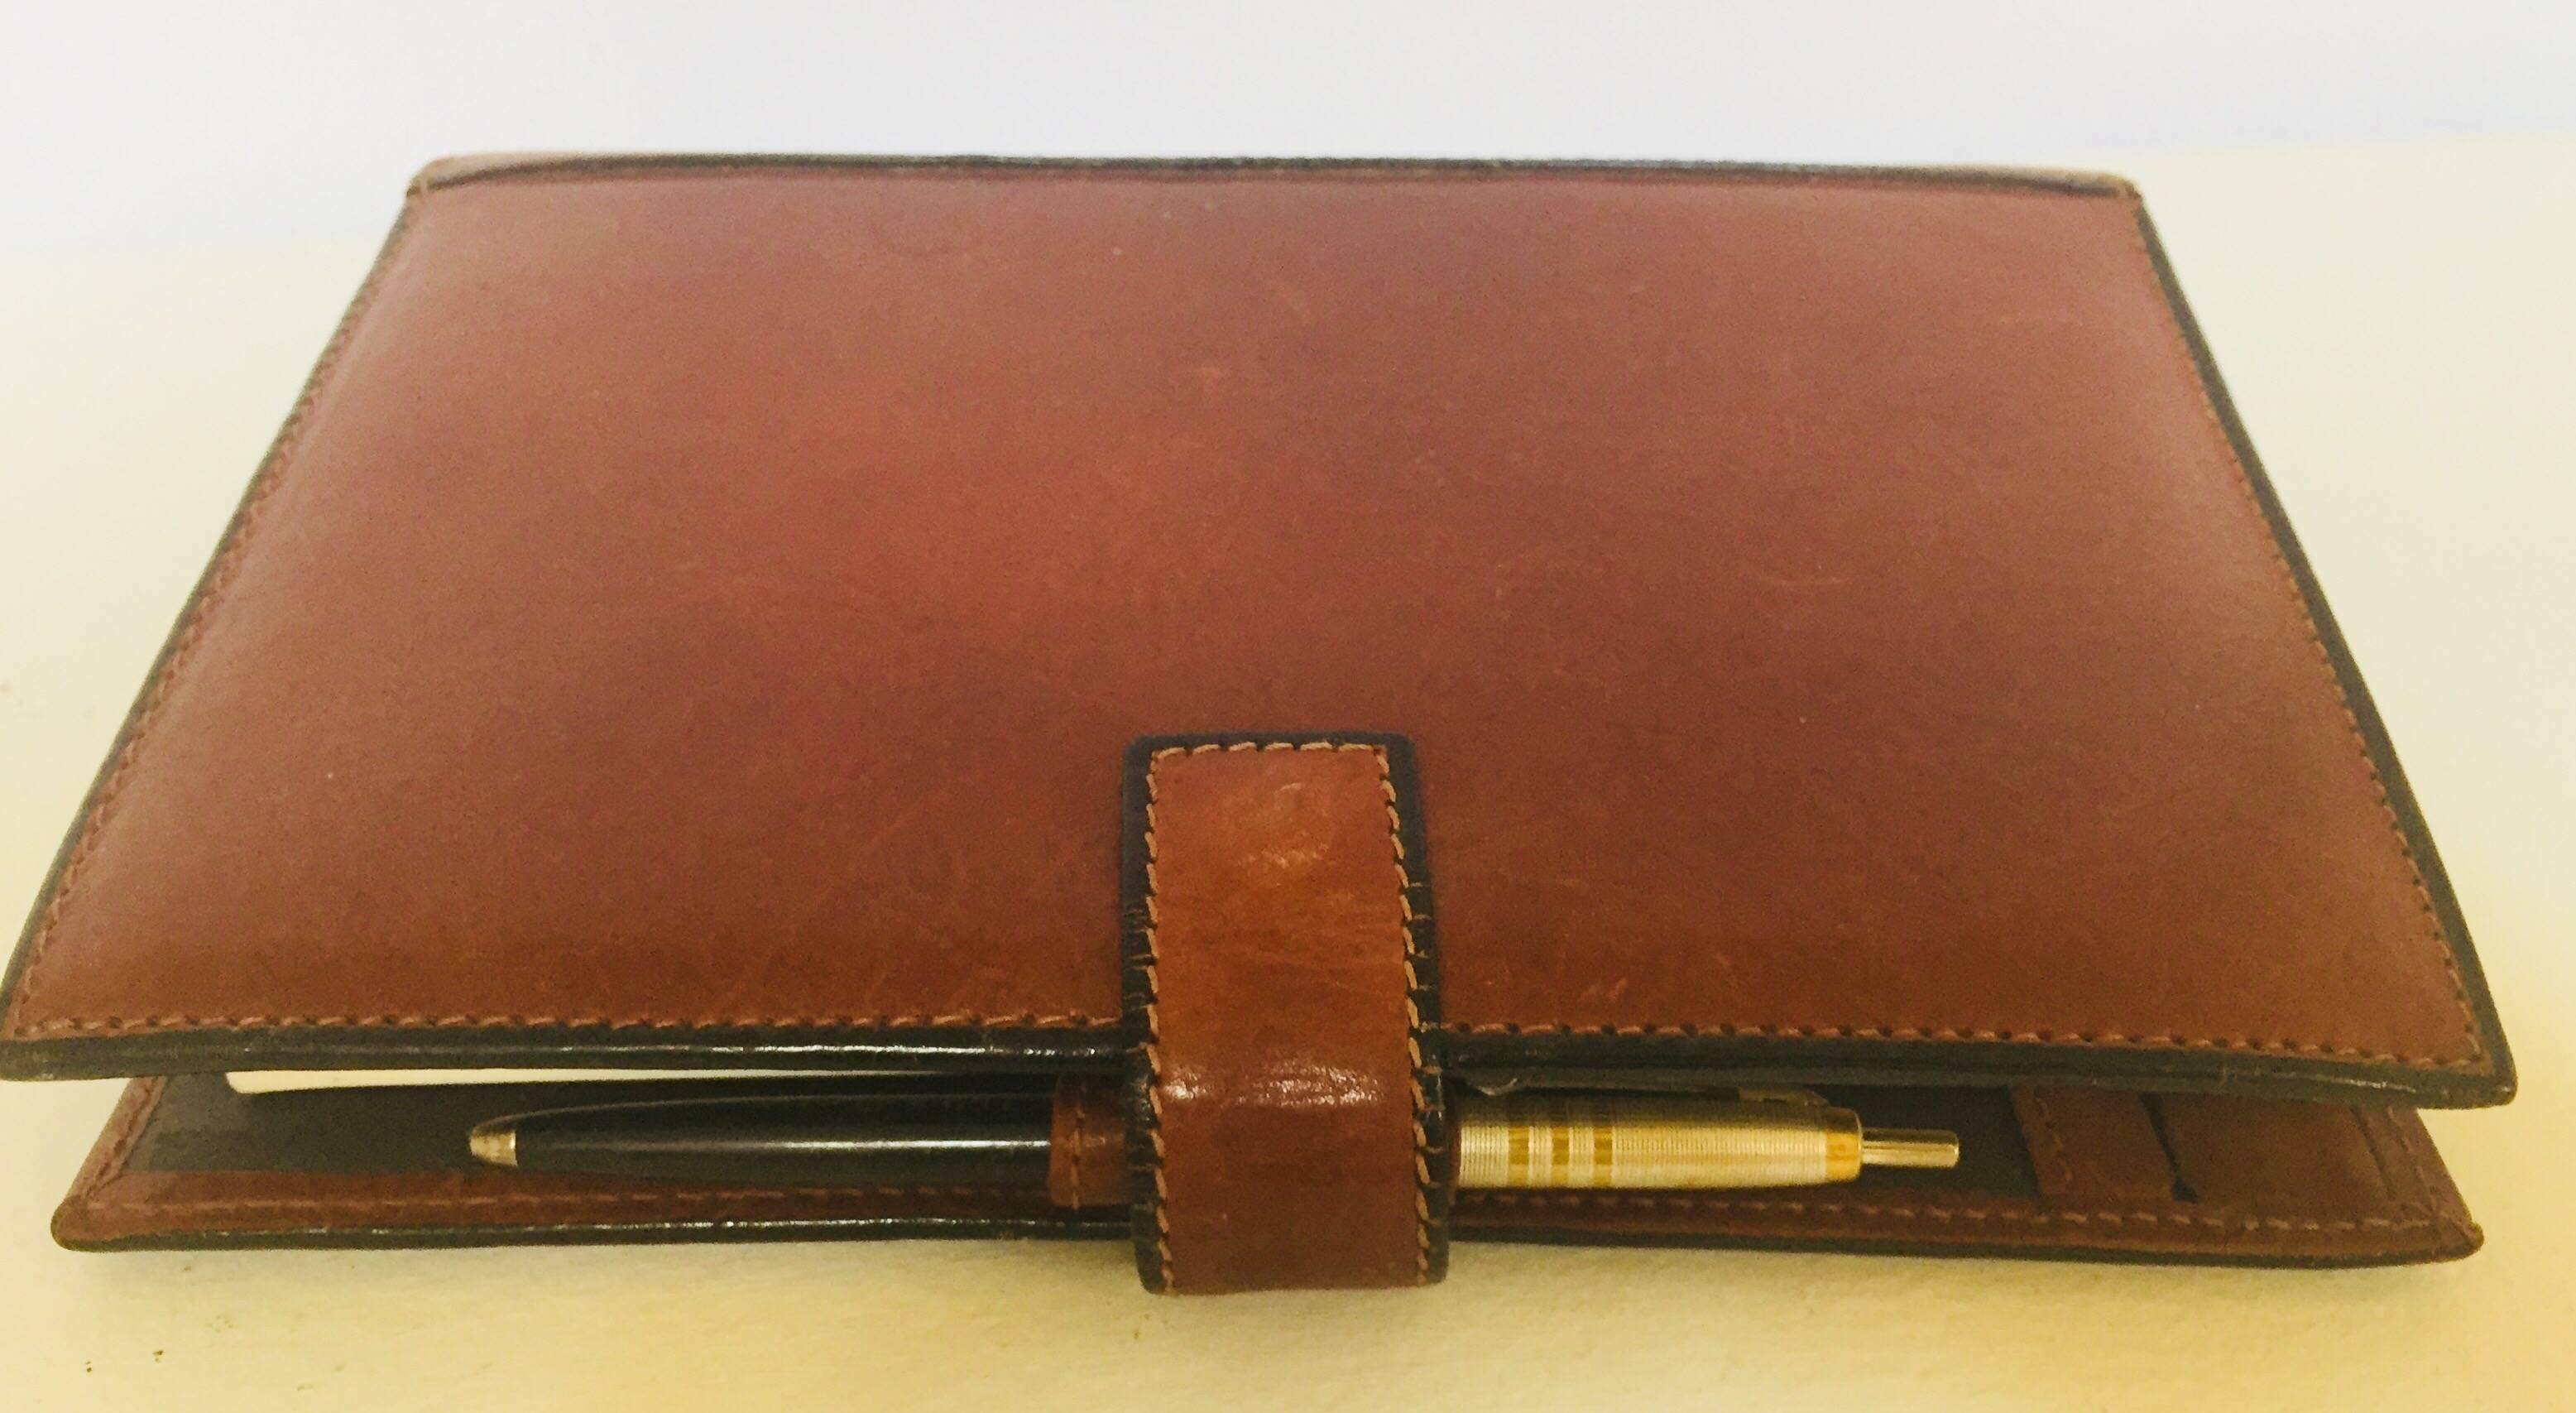 Vintage brown soft leather agenda refillable by Tumi.
The agenda is lined in brown polished stitched leather and has convenient diagonal pockets on the front and back inside covers.
Agenda pages show a monthly planner, a week-at-a-glance, yearly